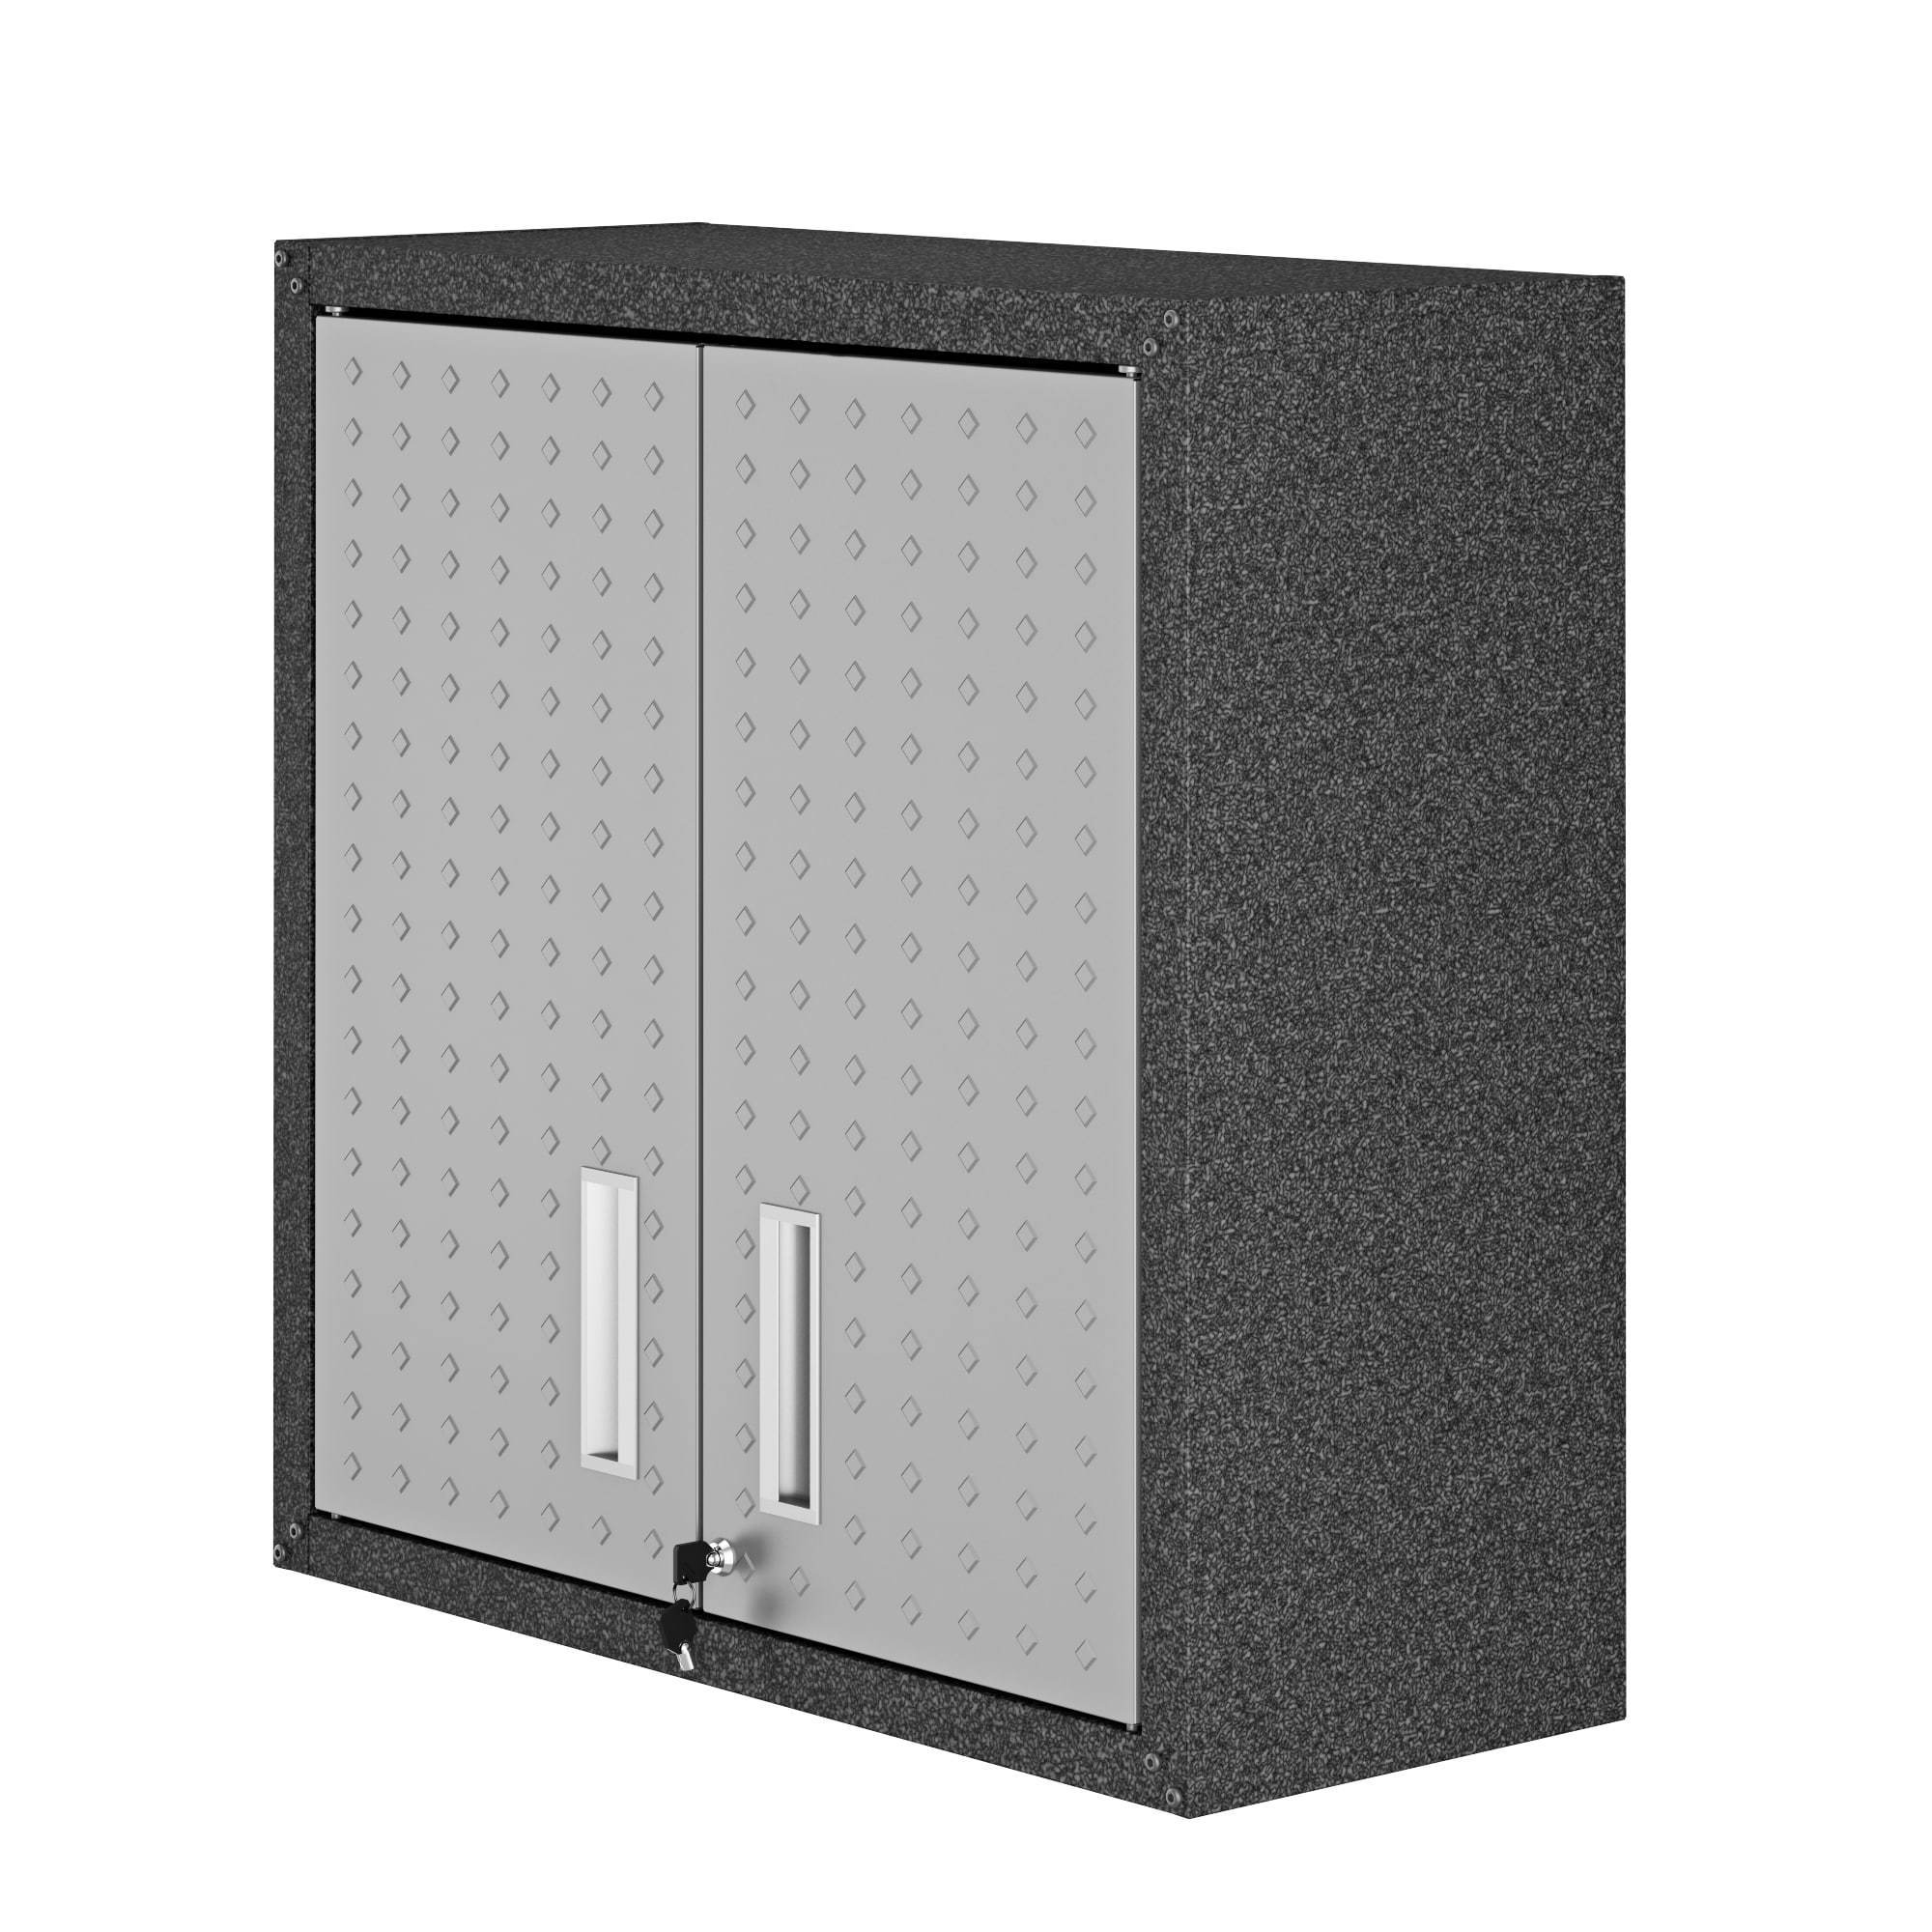 Manhattan Comfort, Fortress Floating Garage Cabinet in Grey, Height 30.3 in, Width 30 in, Color Gray, Model 5GMC